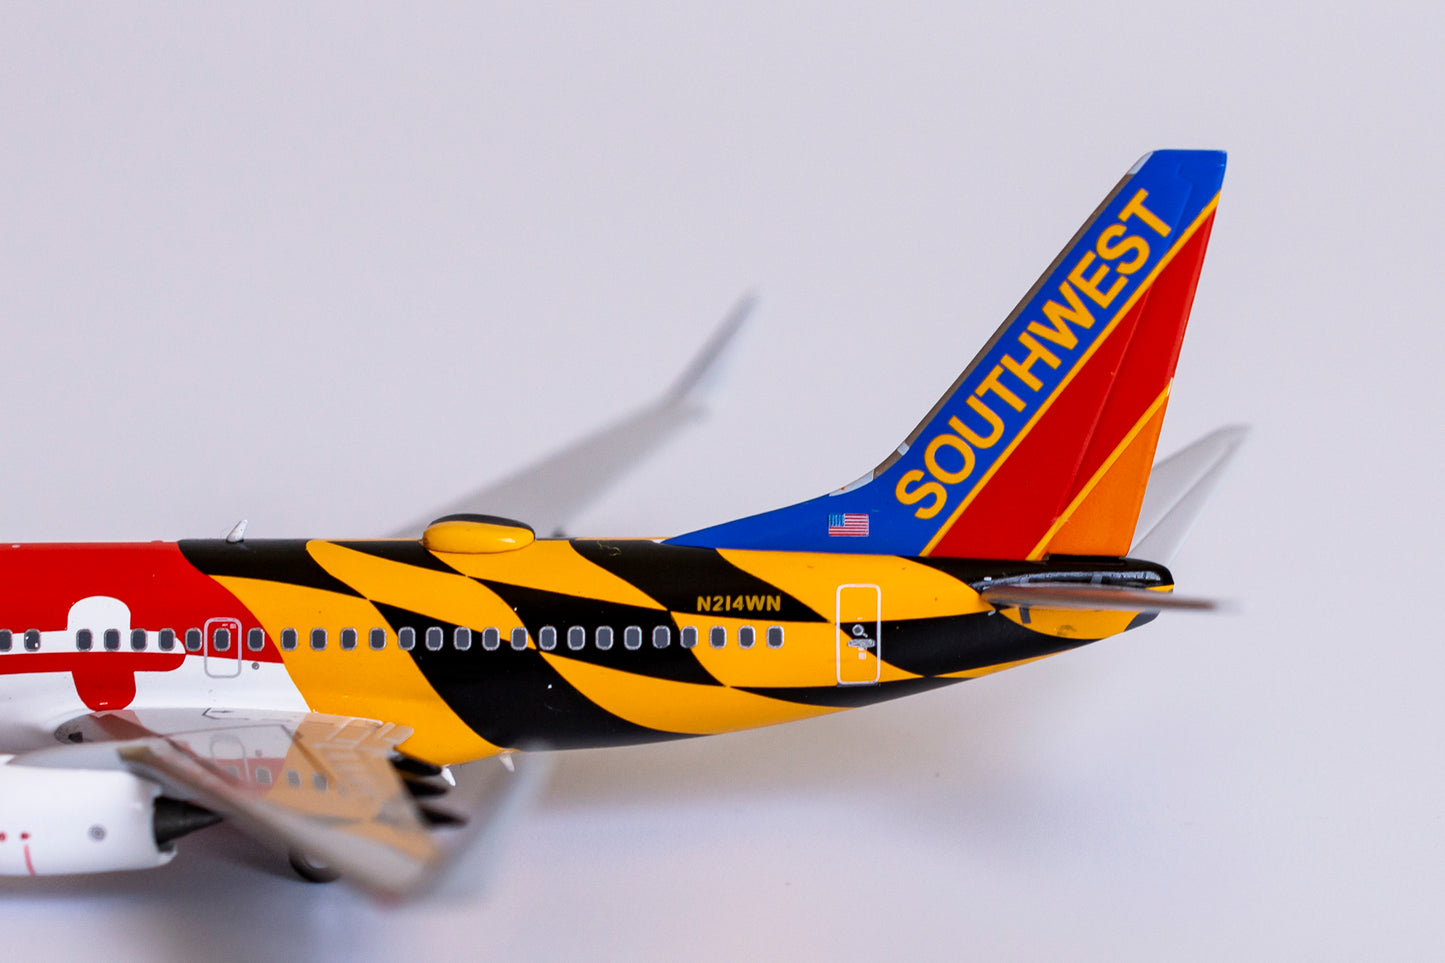 1:400 NG Models Southwest Airlines Boeing 737-700 "Maryland One" N214WN (Canyon Blue Tail) NG77006